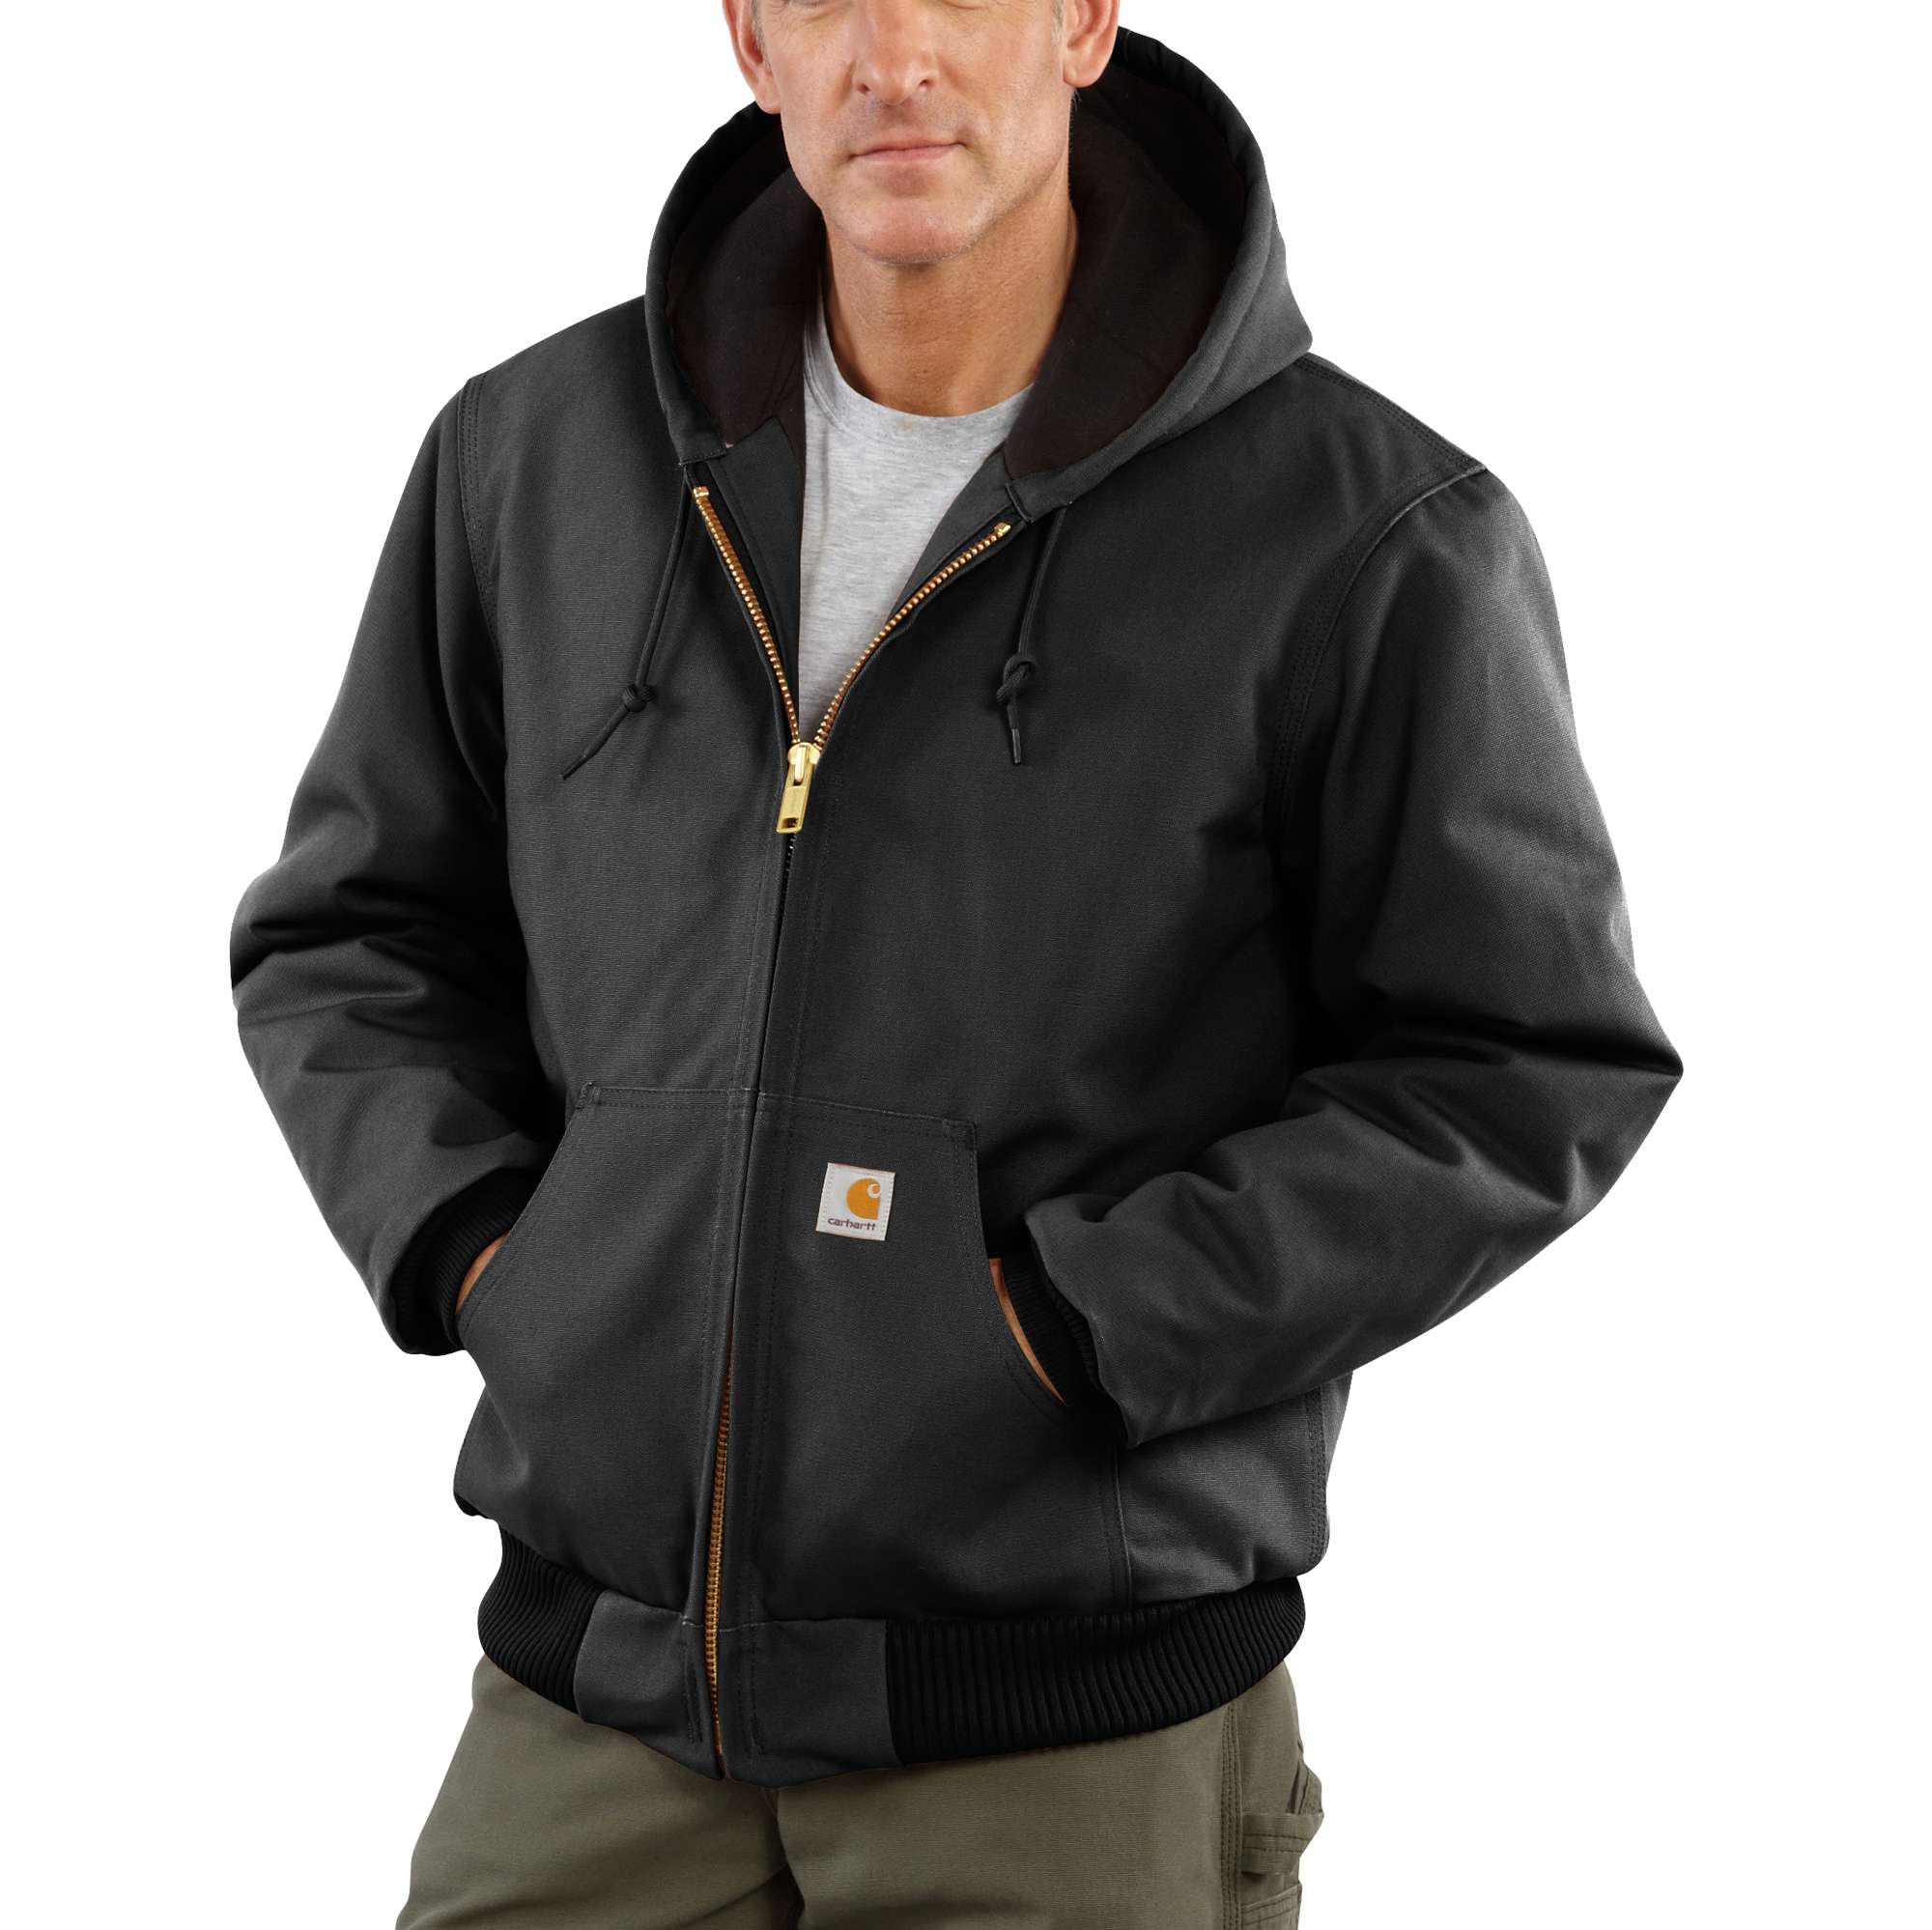 Full Swing® Loose Fit Quick Duck Insulated Jacket - 3 Warmest 